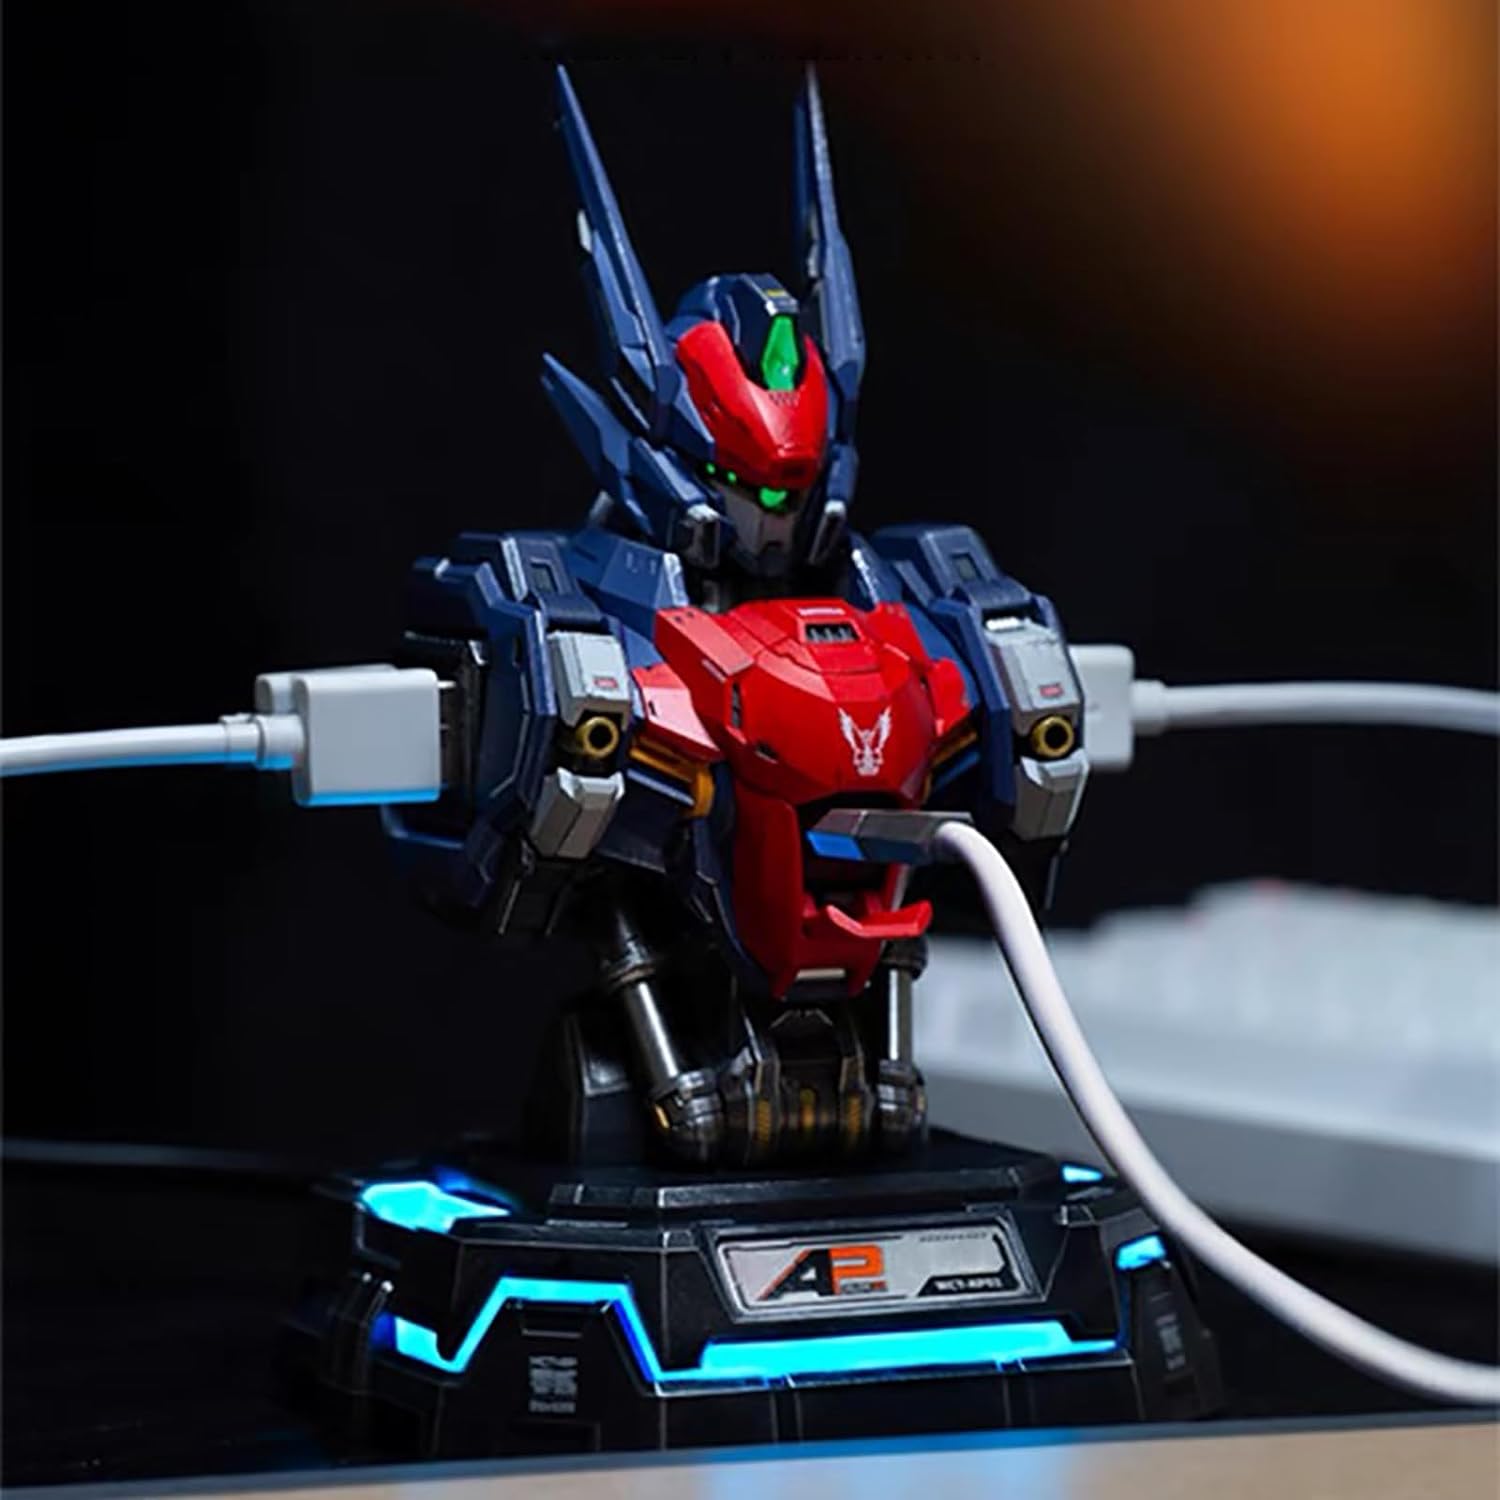 High Tech Charging Station - GaN Fast Charger - Highly Detailed Robotic Design With LED